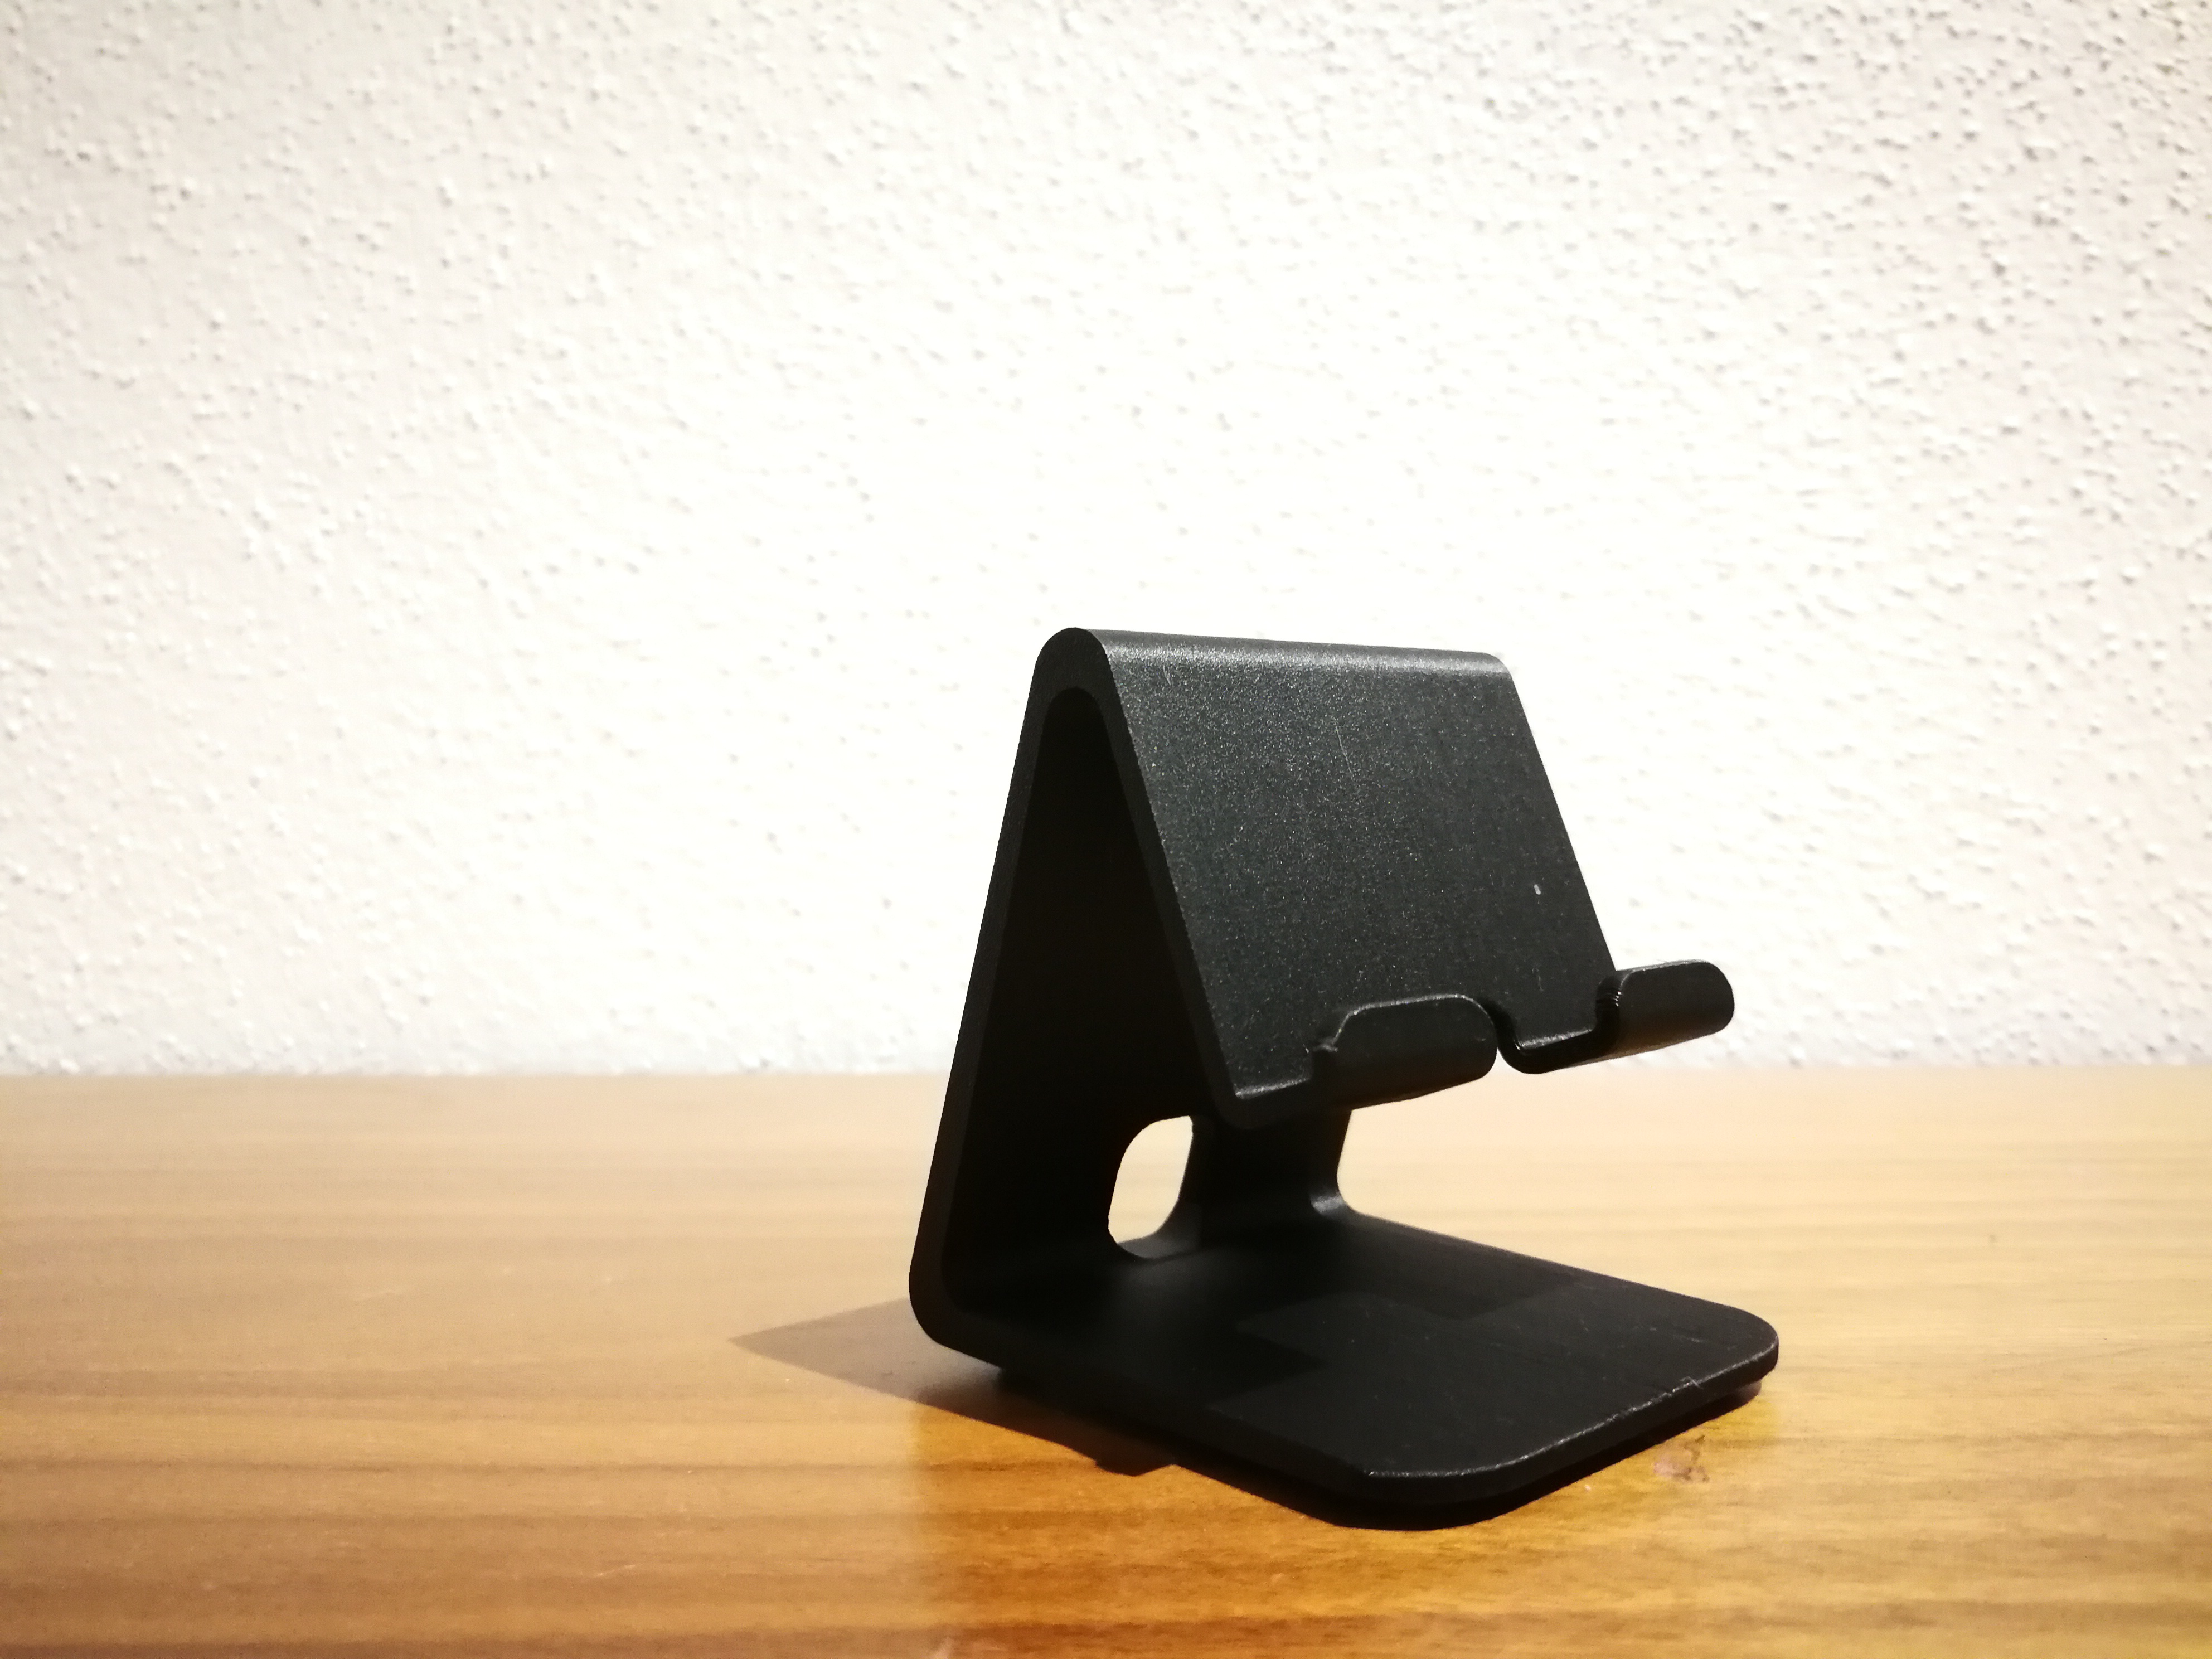 Phone stand - 2 device thicknesses